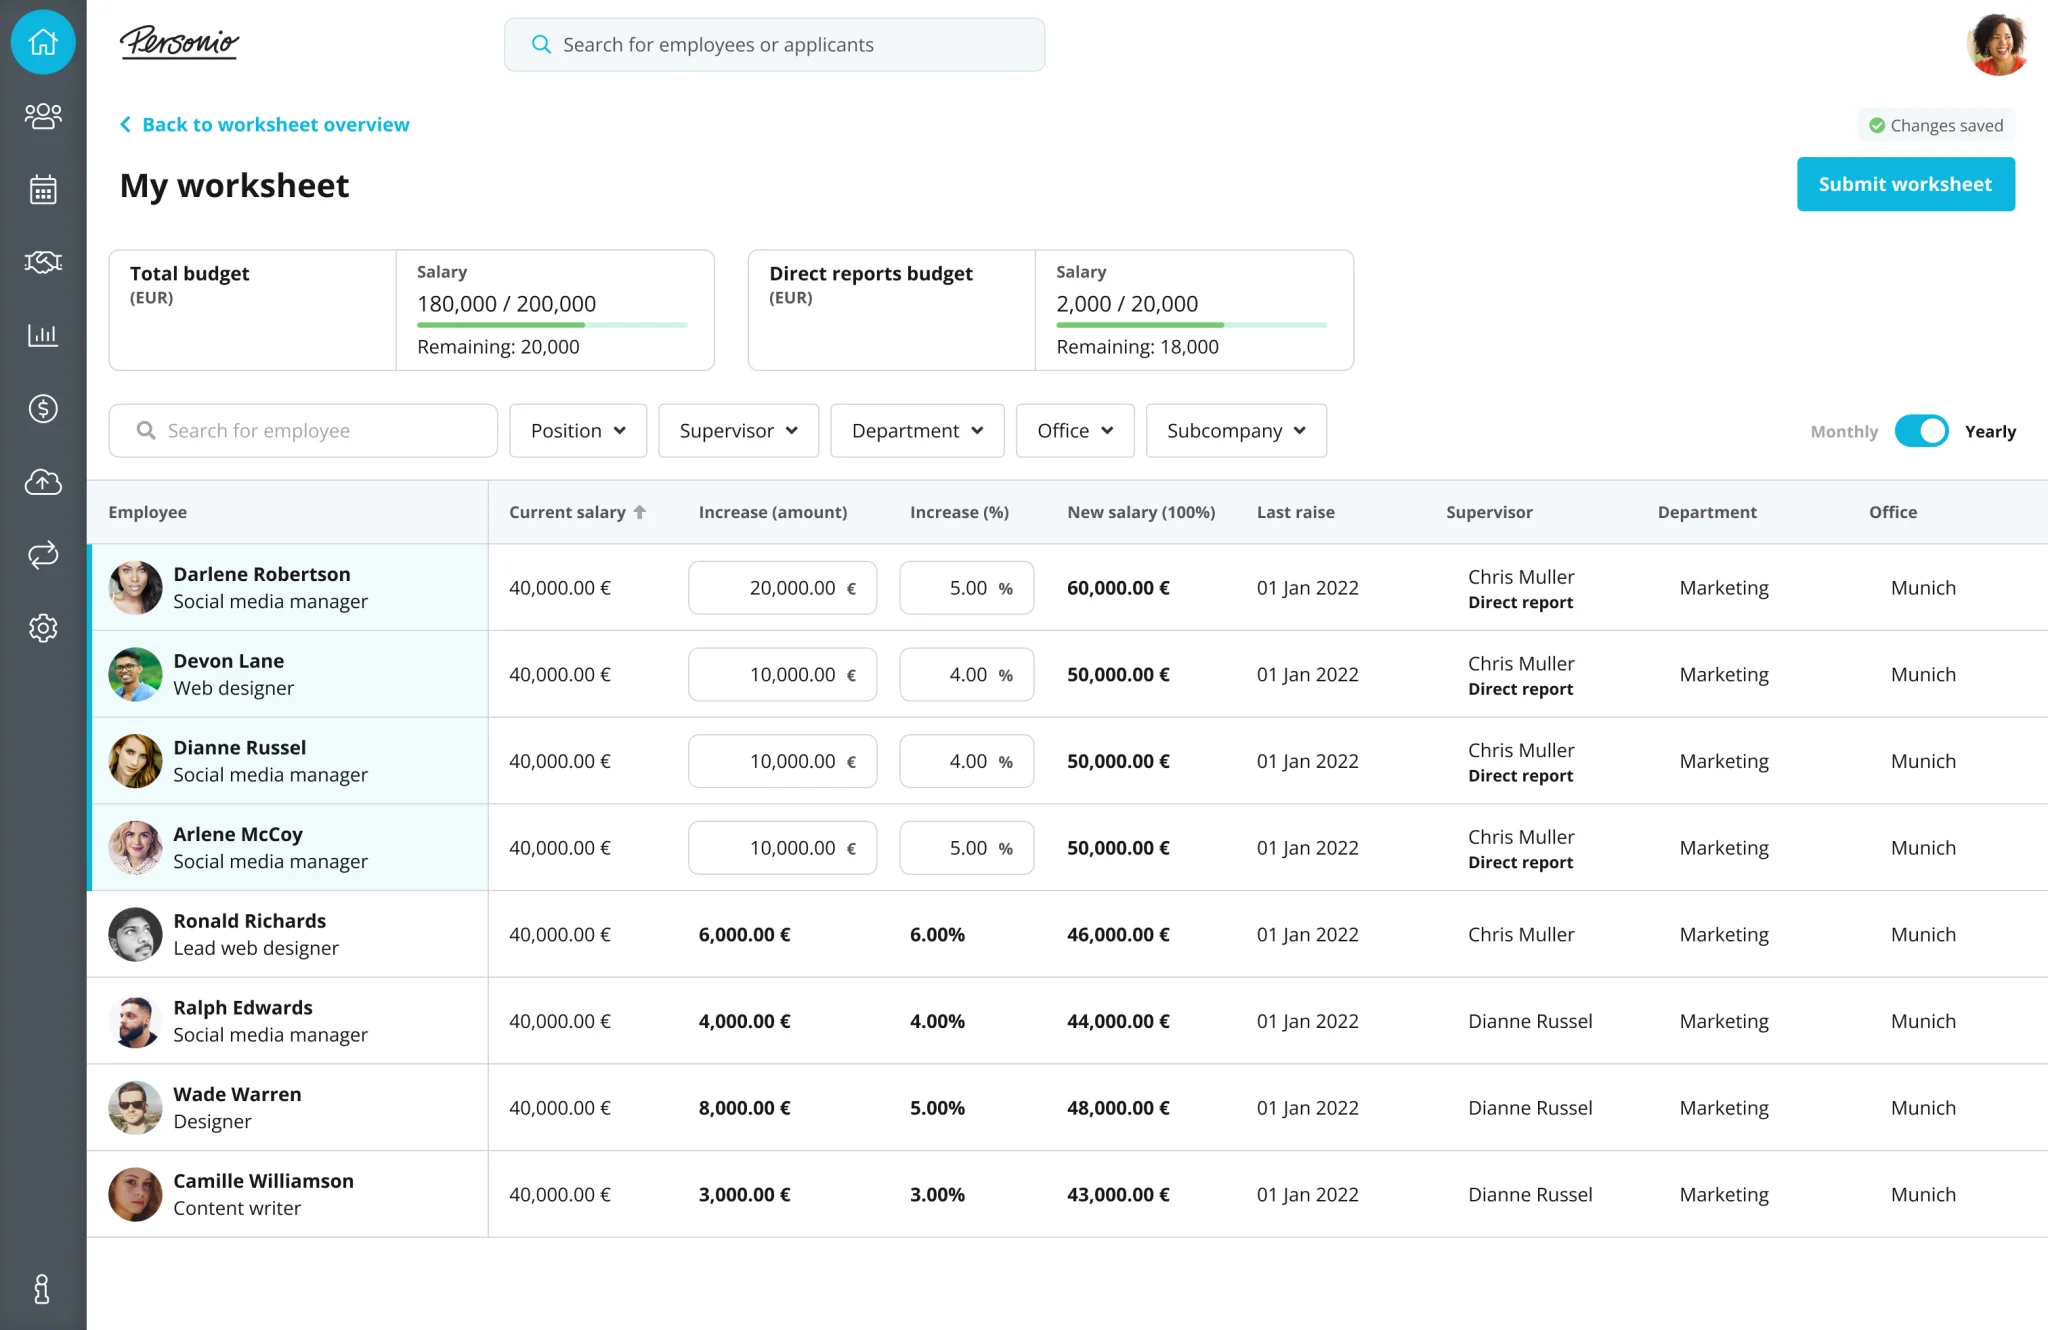 Compensation Management: Dashboard ready for edits